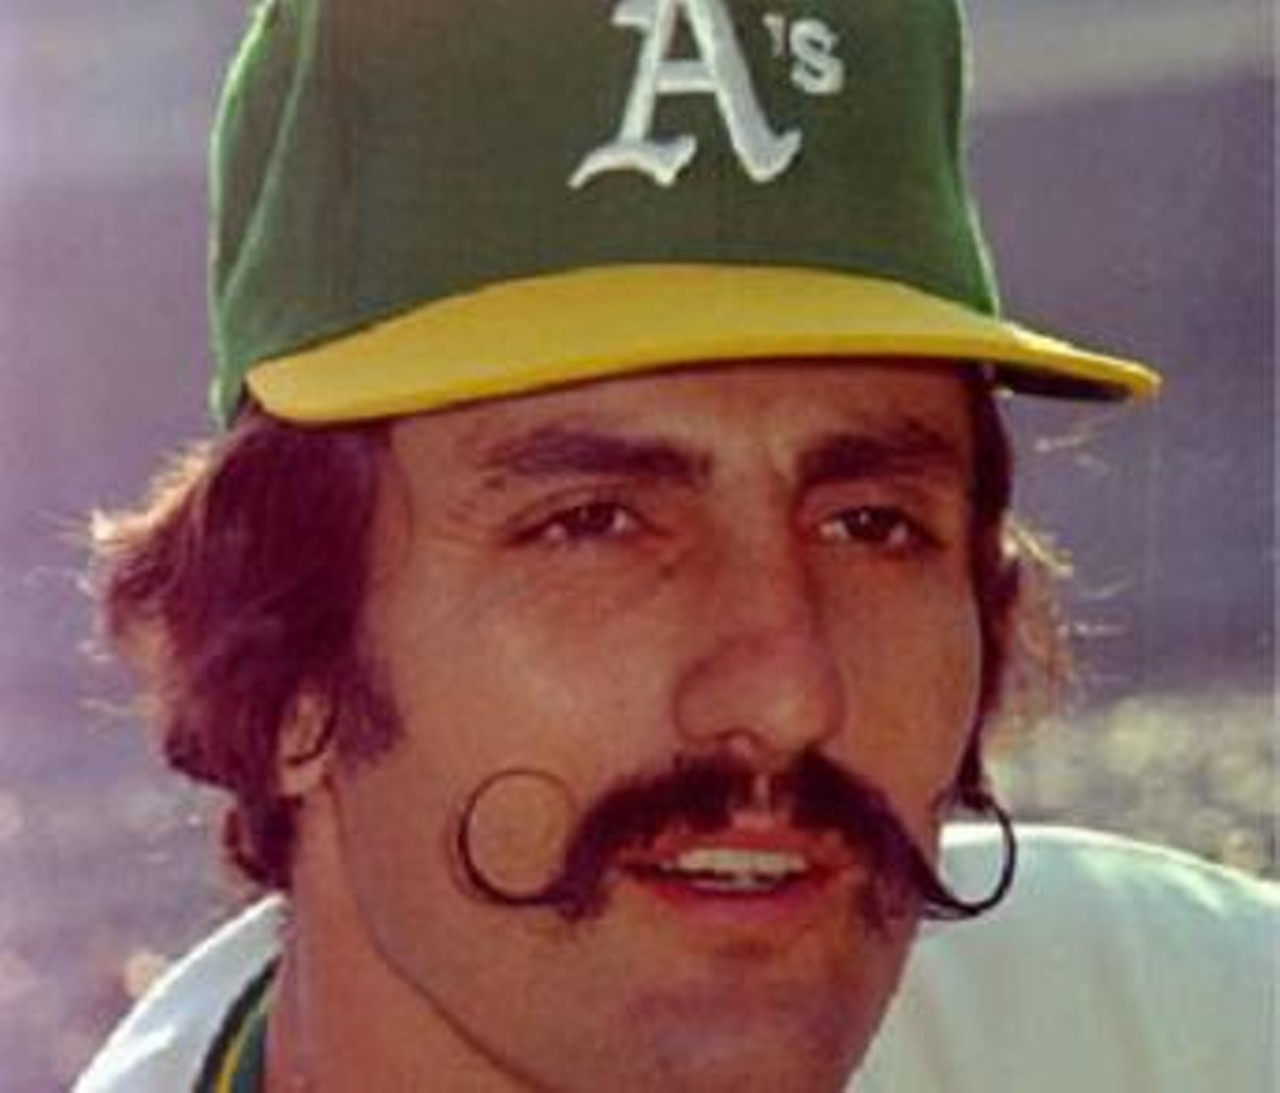 The most famous baseball mustache of all time belongs to Rollie Fingers.